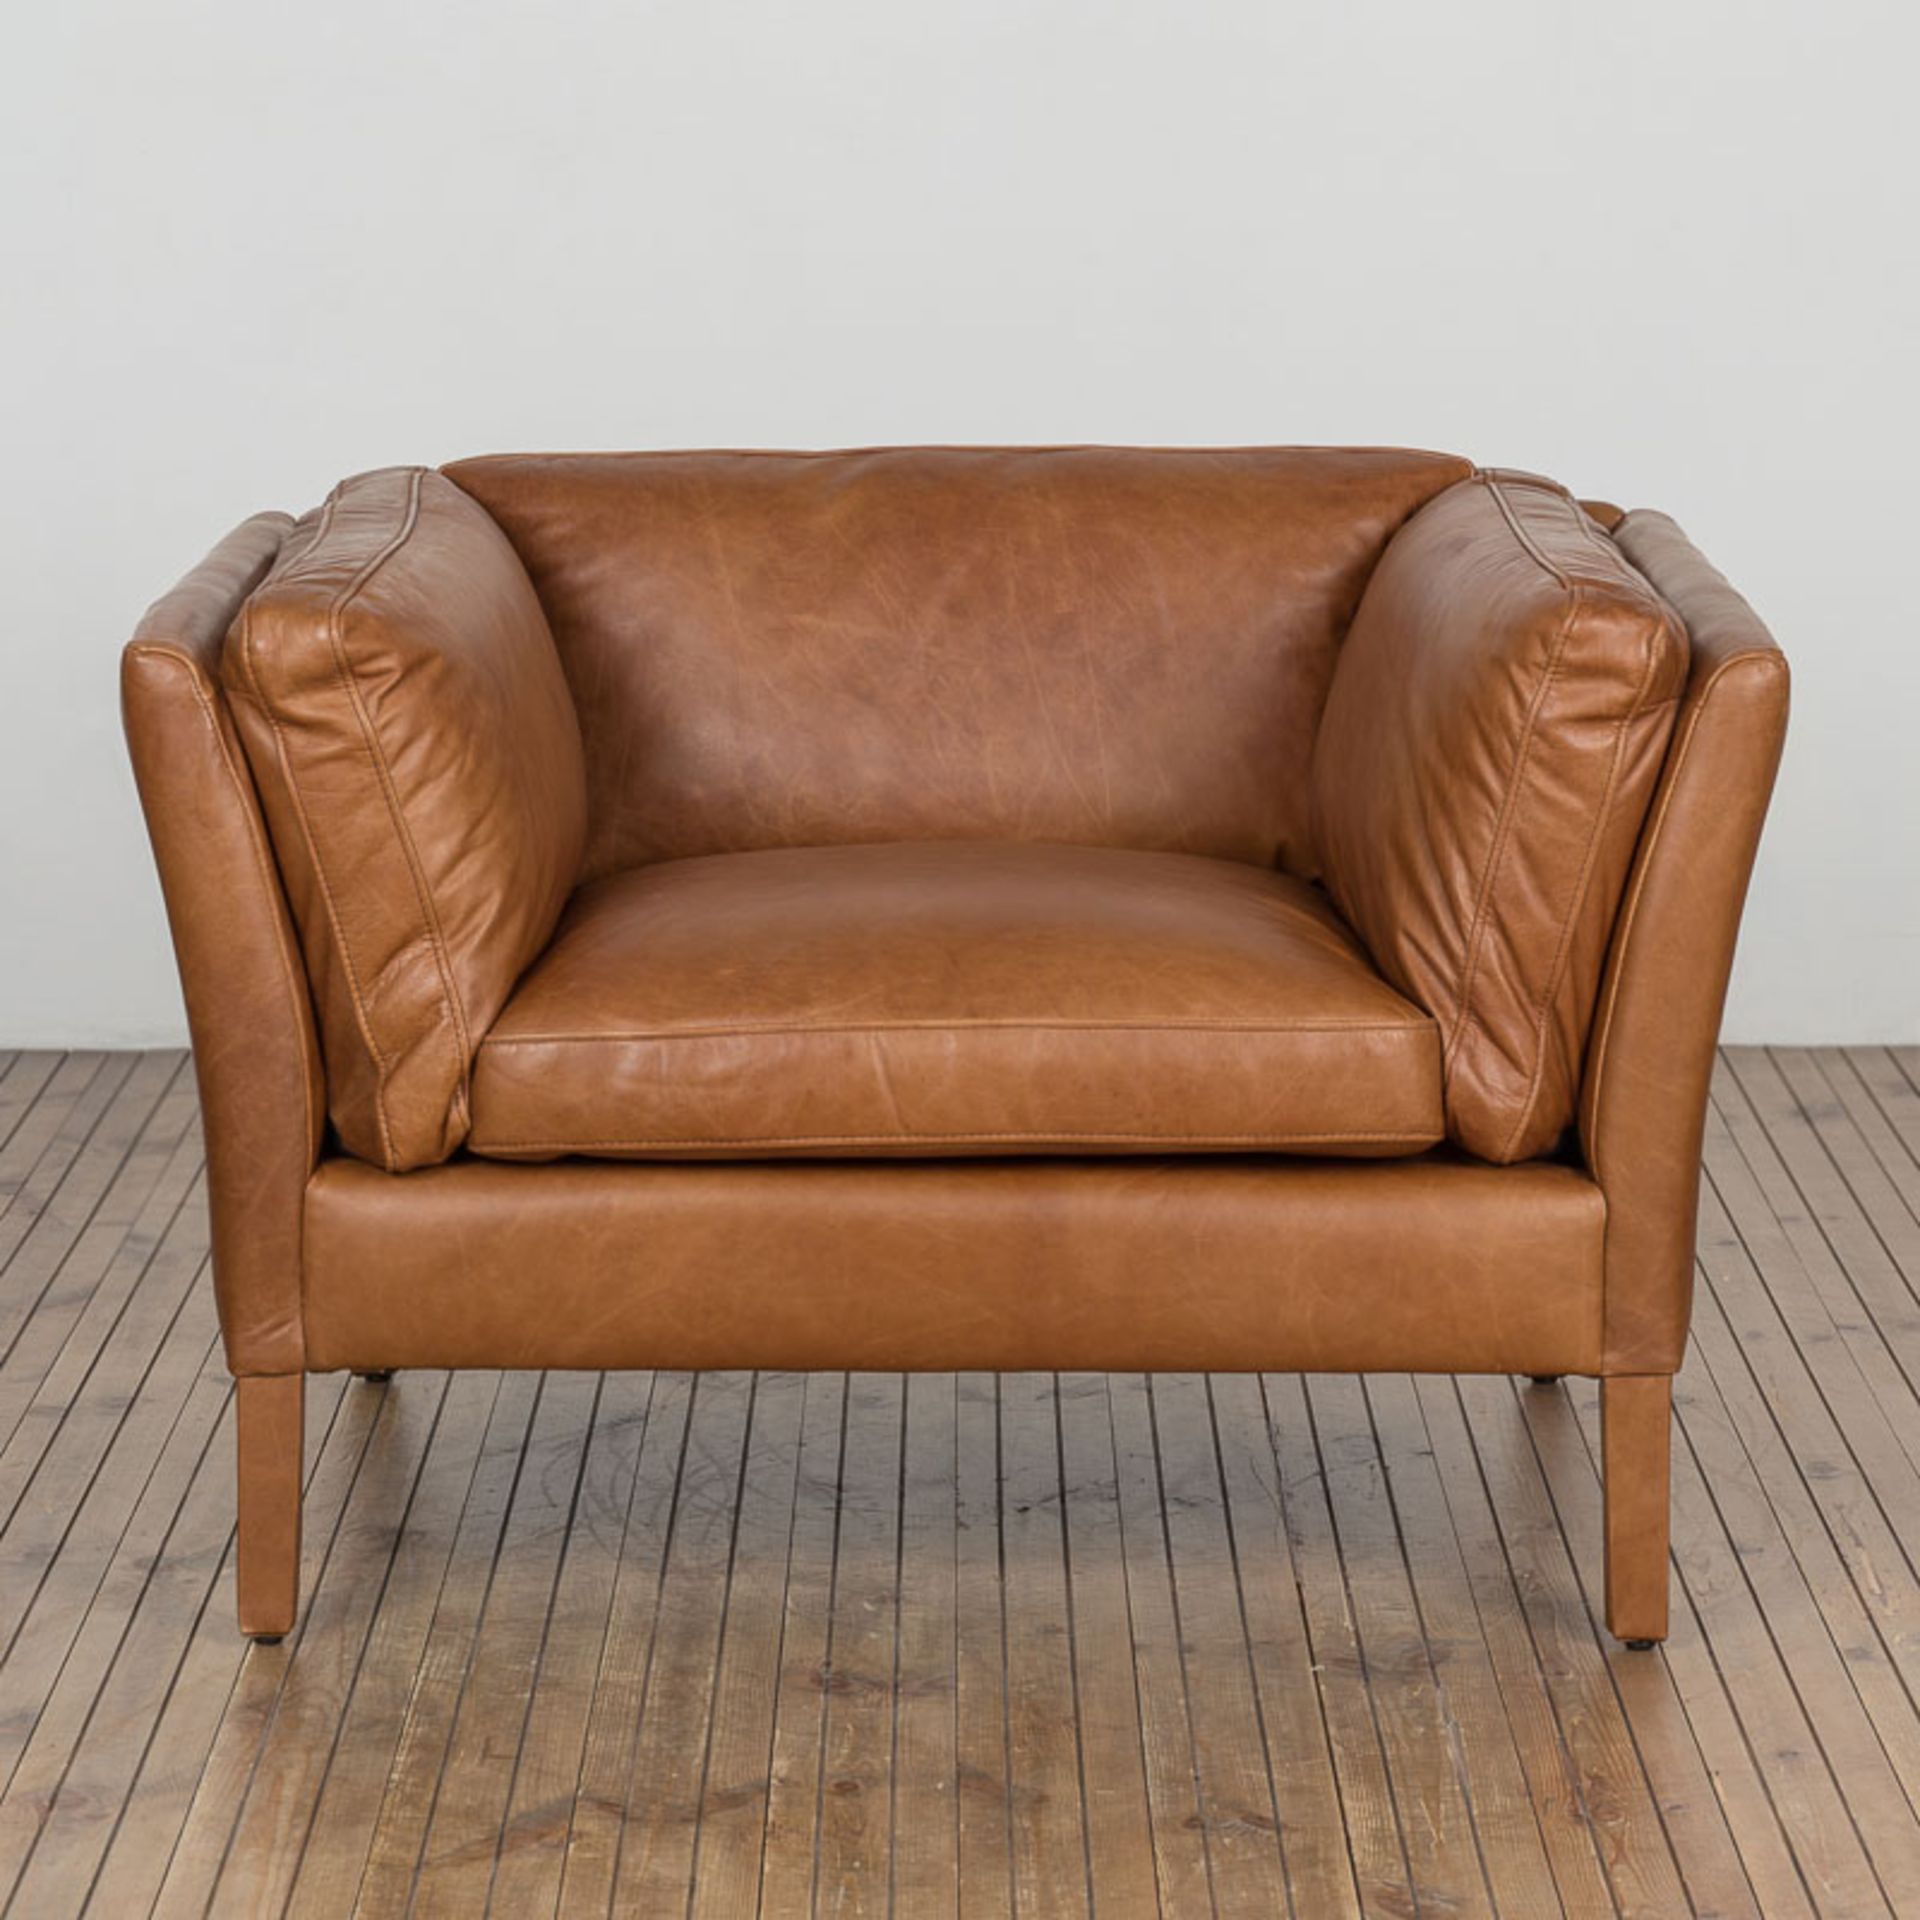 Reggio 1 Seater Sofa Ride Gun Leather The Retro-Styled Look Of The Reggio Is Inspired By The